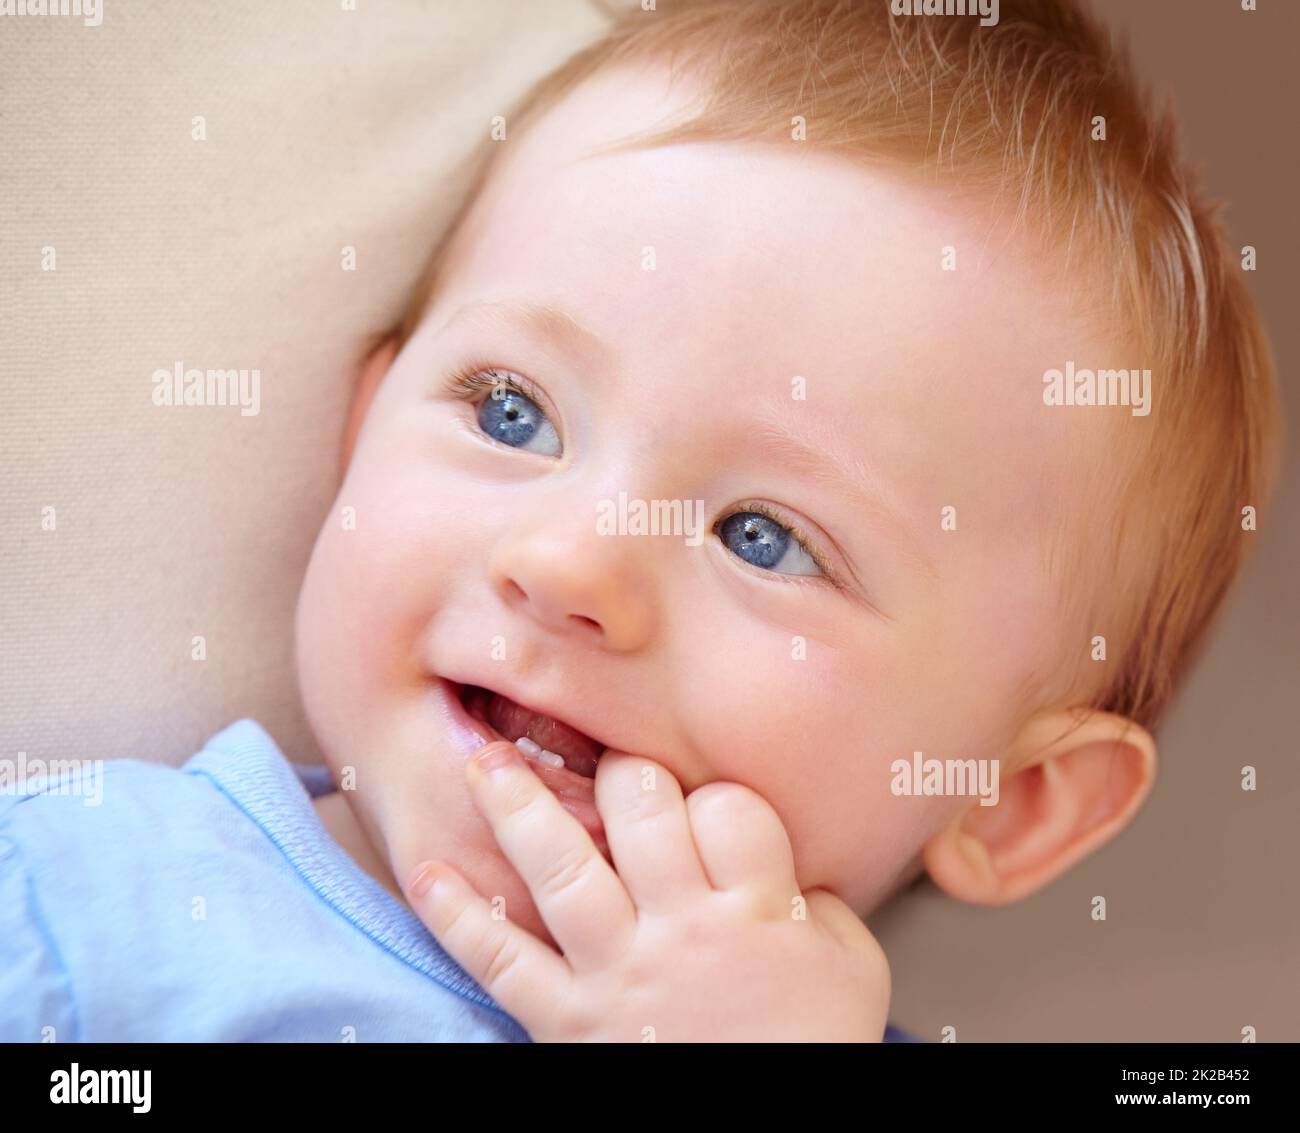 Growing up in the safety of home. Closeup shot of an adorable baby boy in his home. Stock Photo